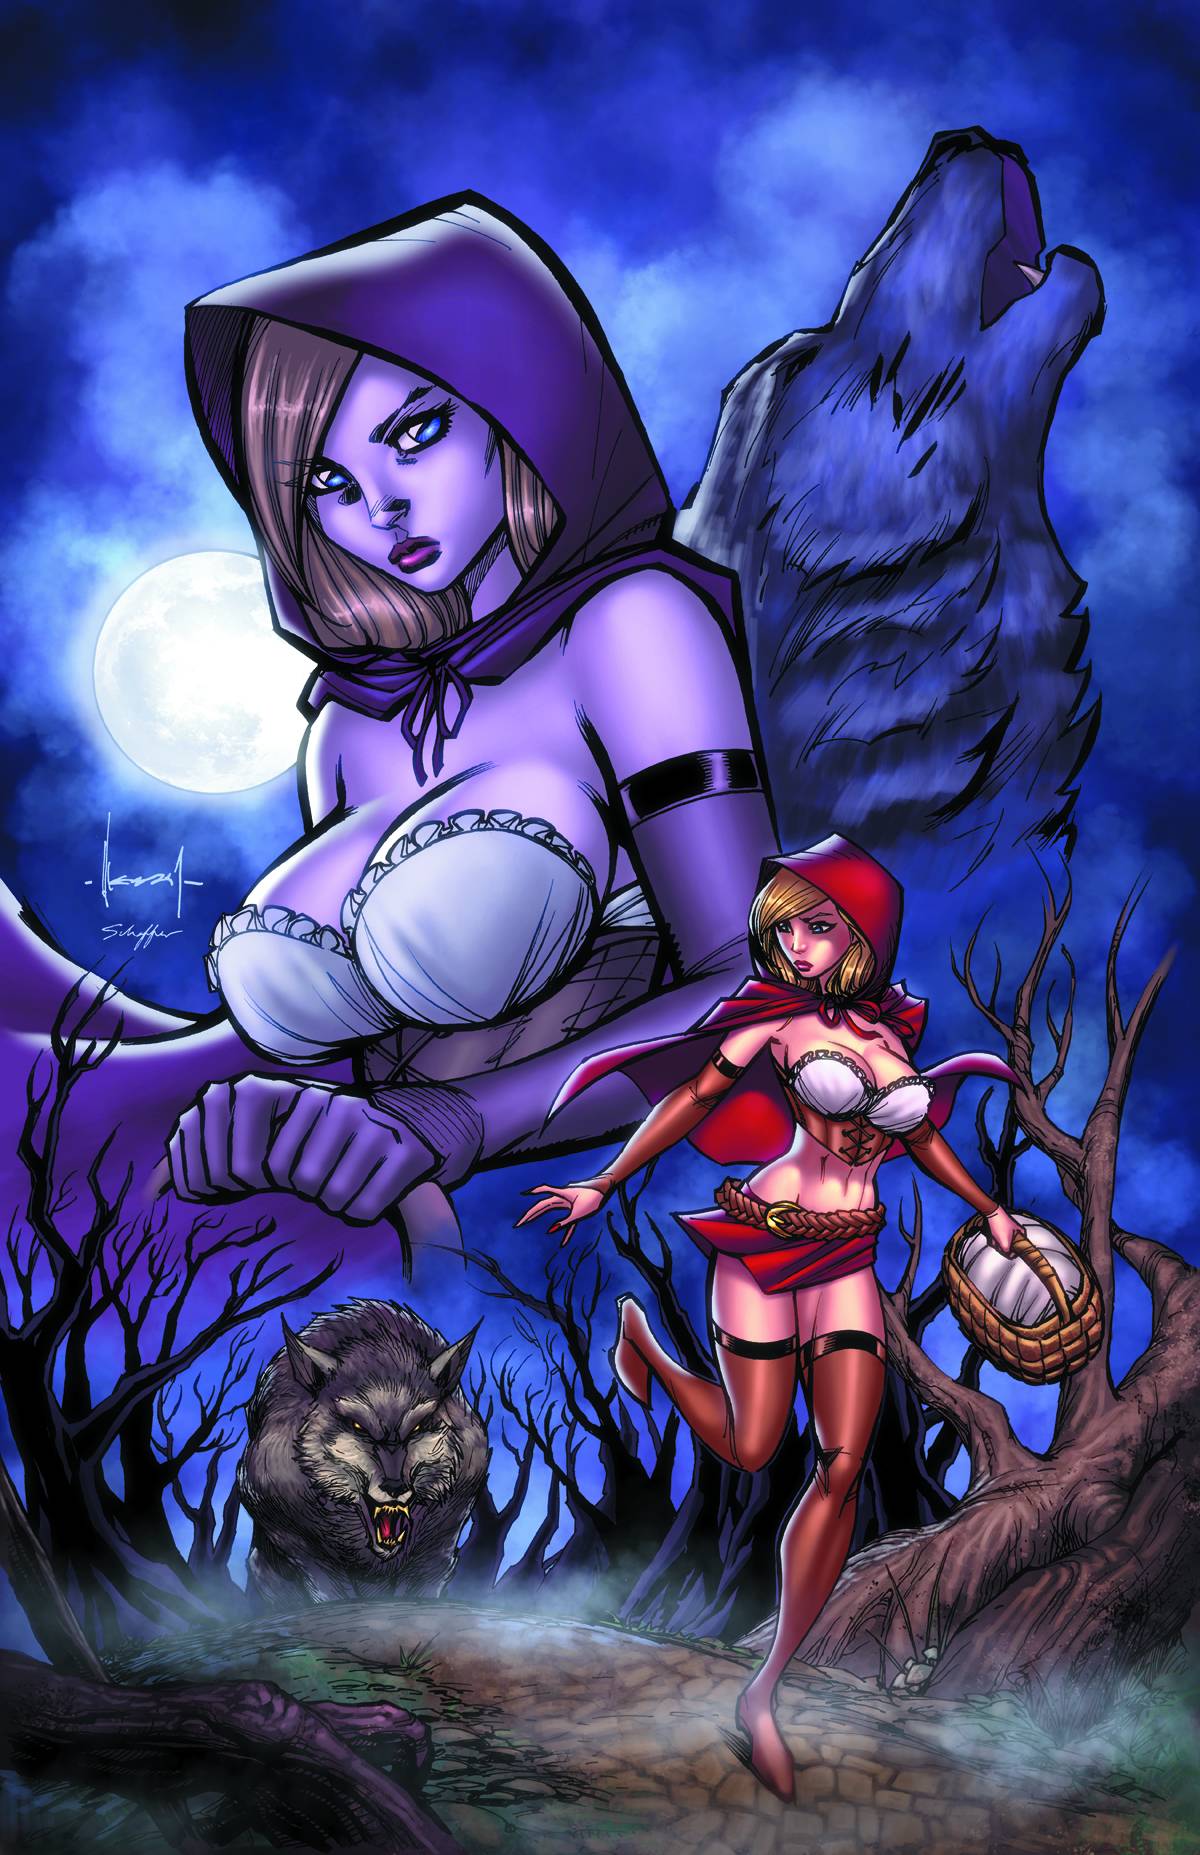 Red riding hood erotic comic, african maid nude pictures